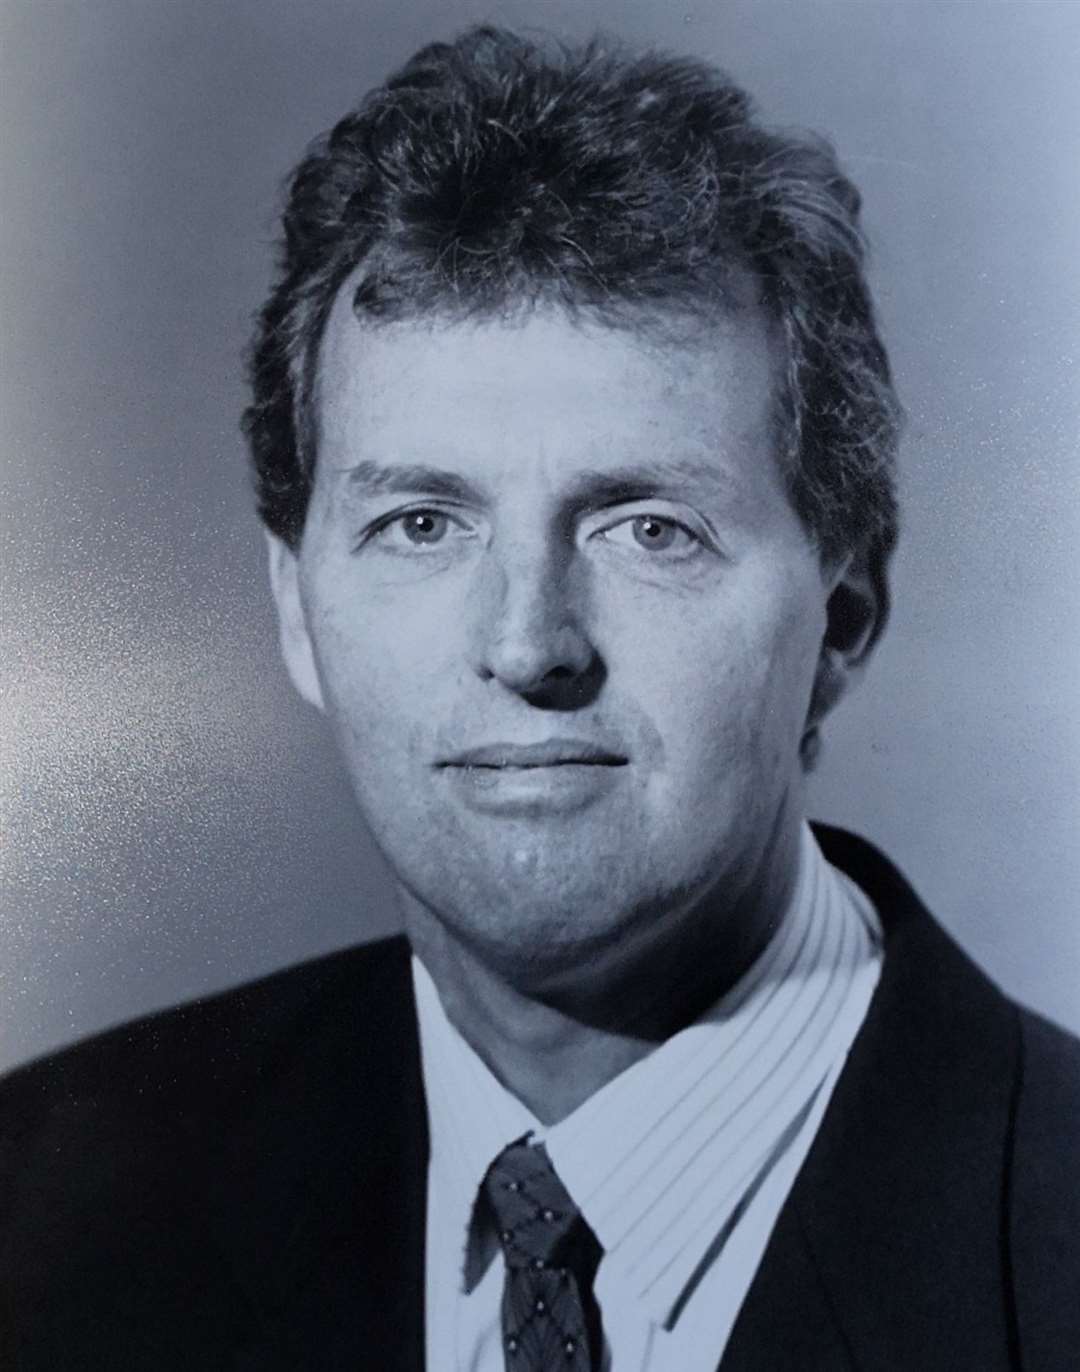 Clive Boreham served on Dover District Council as a councillor in the 80s and 90s.